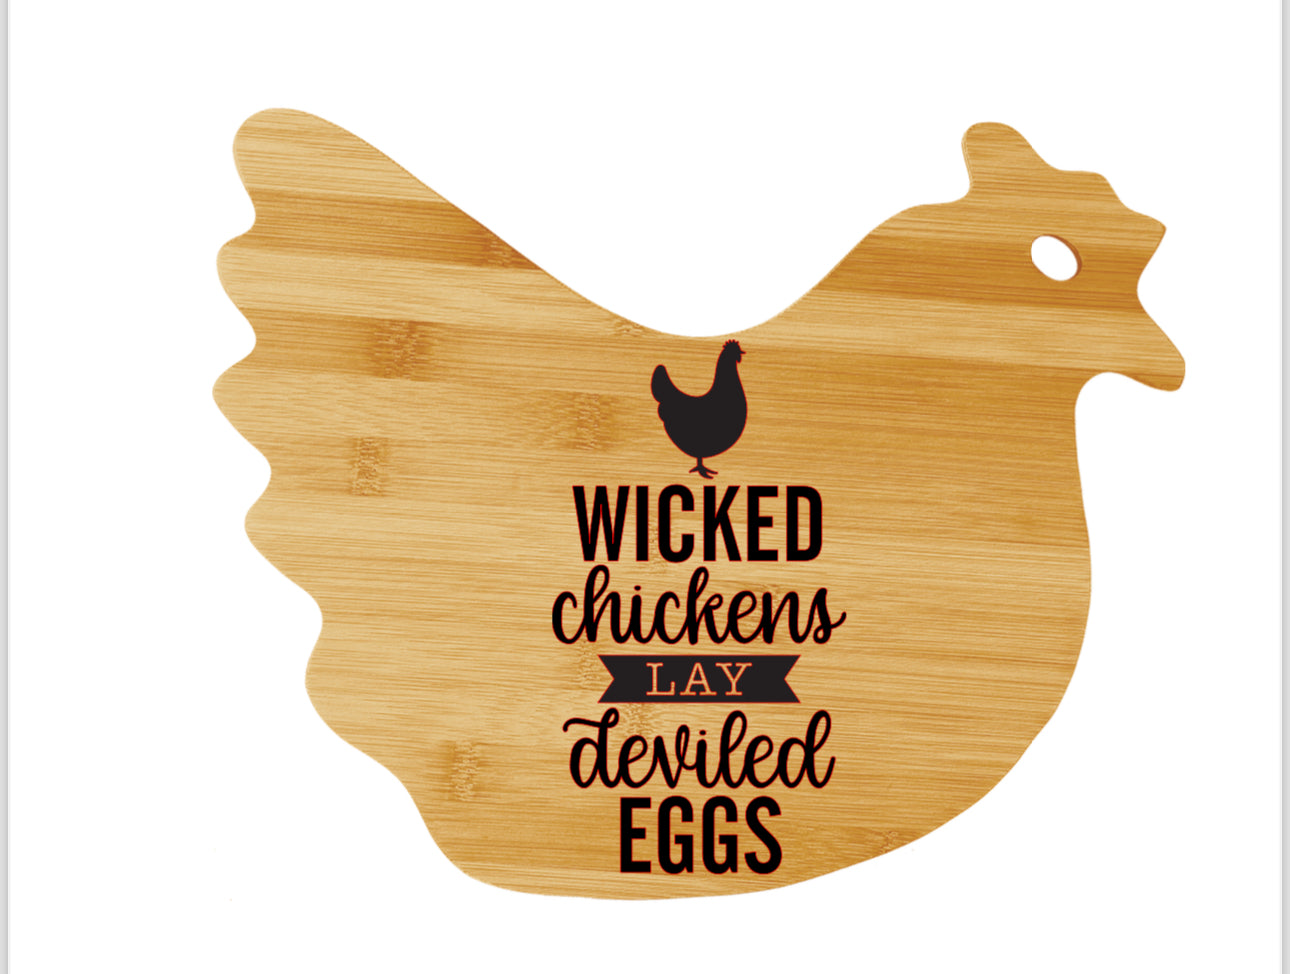 Wicked Chickens Lay Deviled Eggs - Bamboo Board